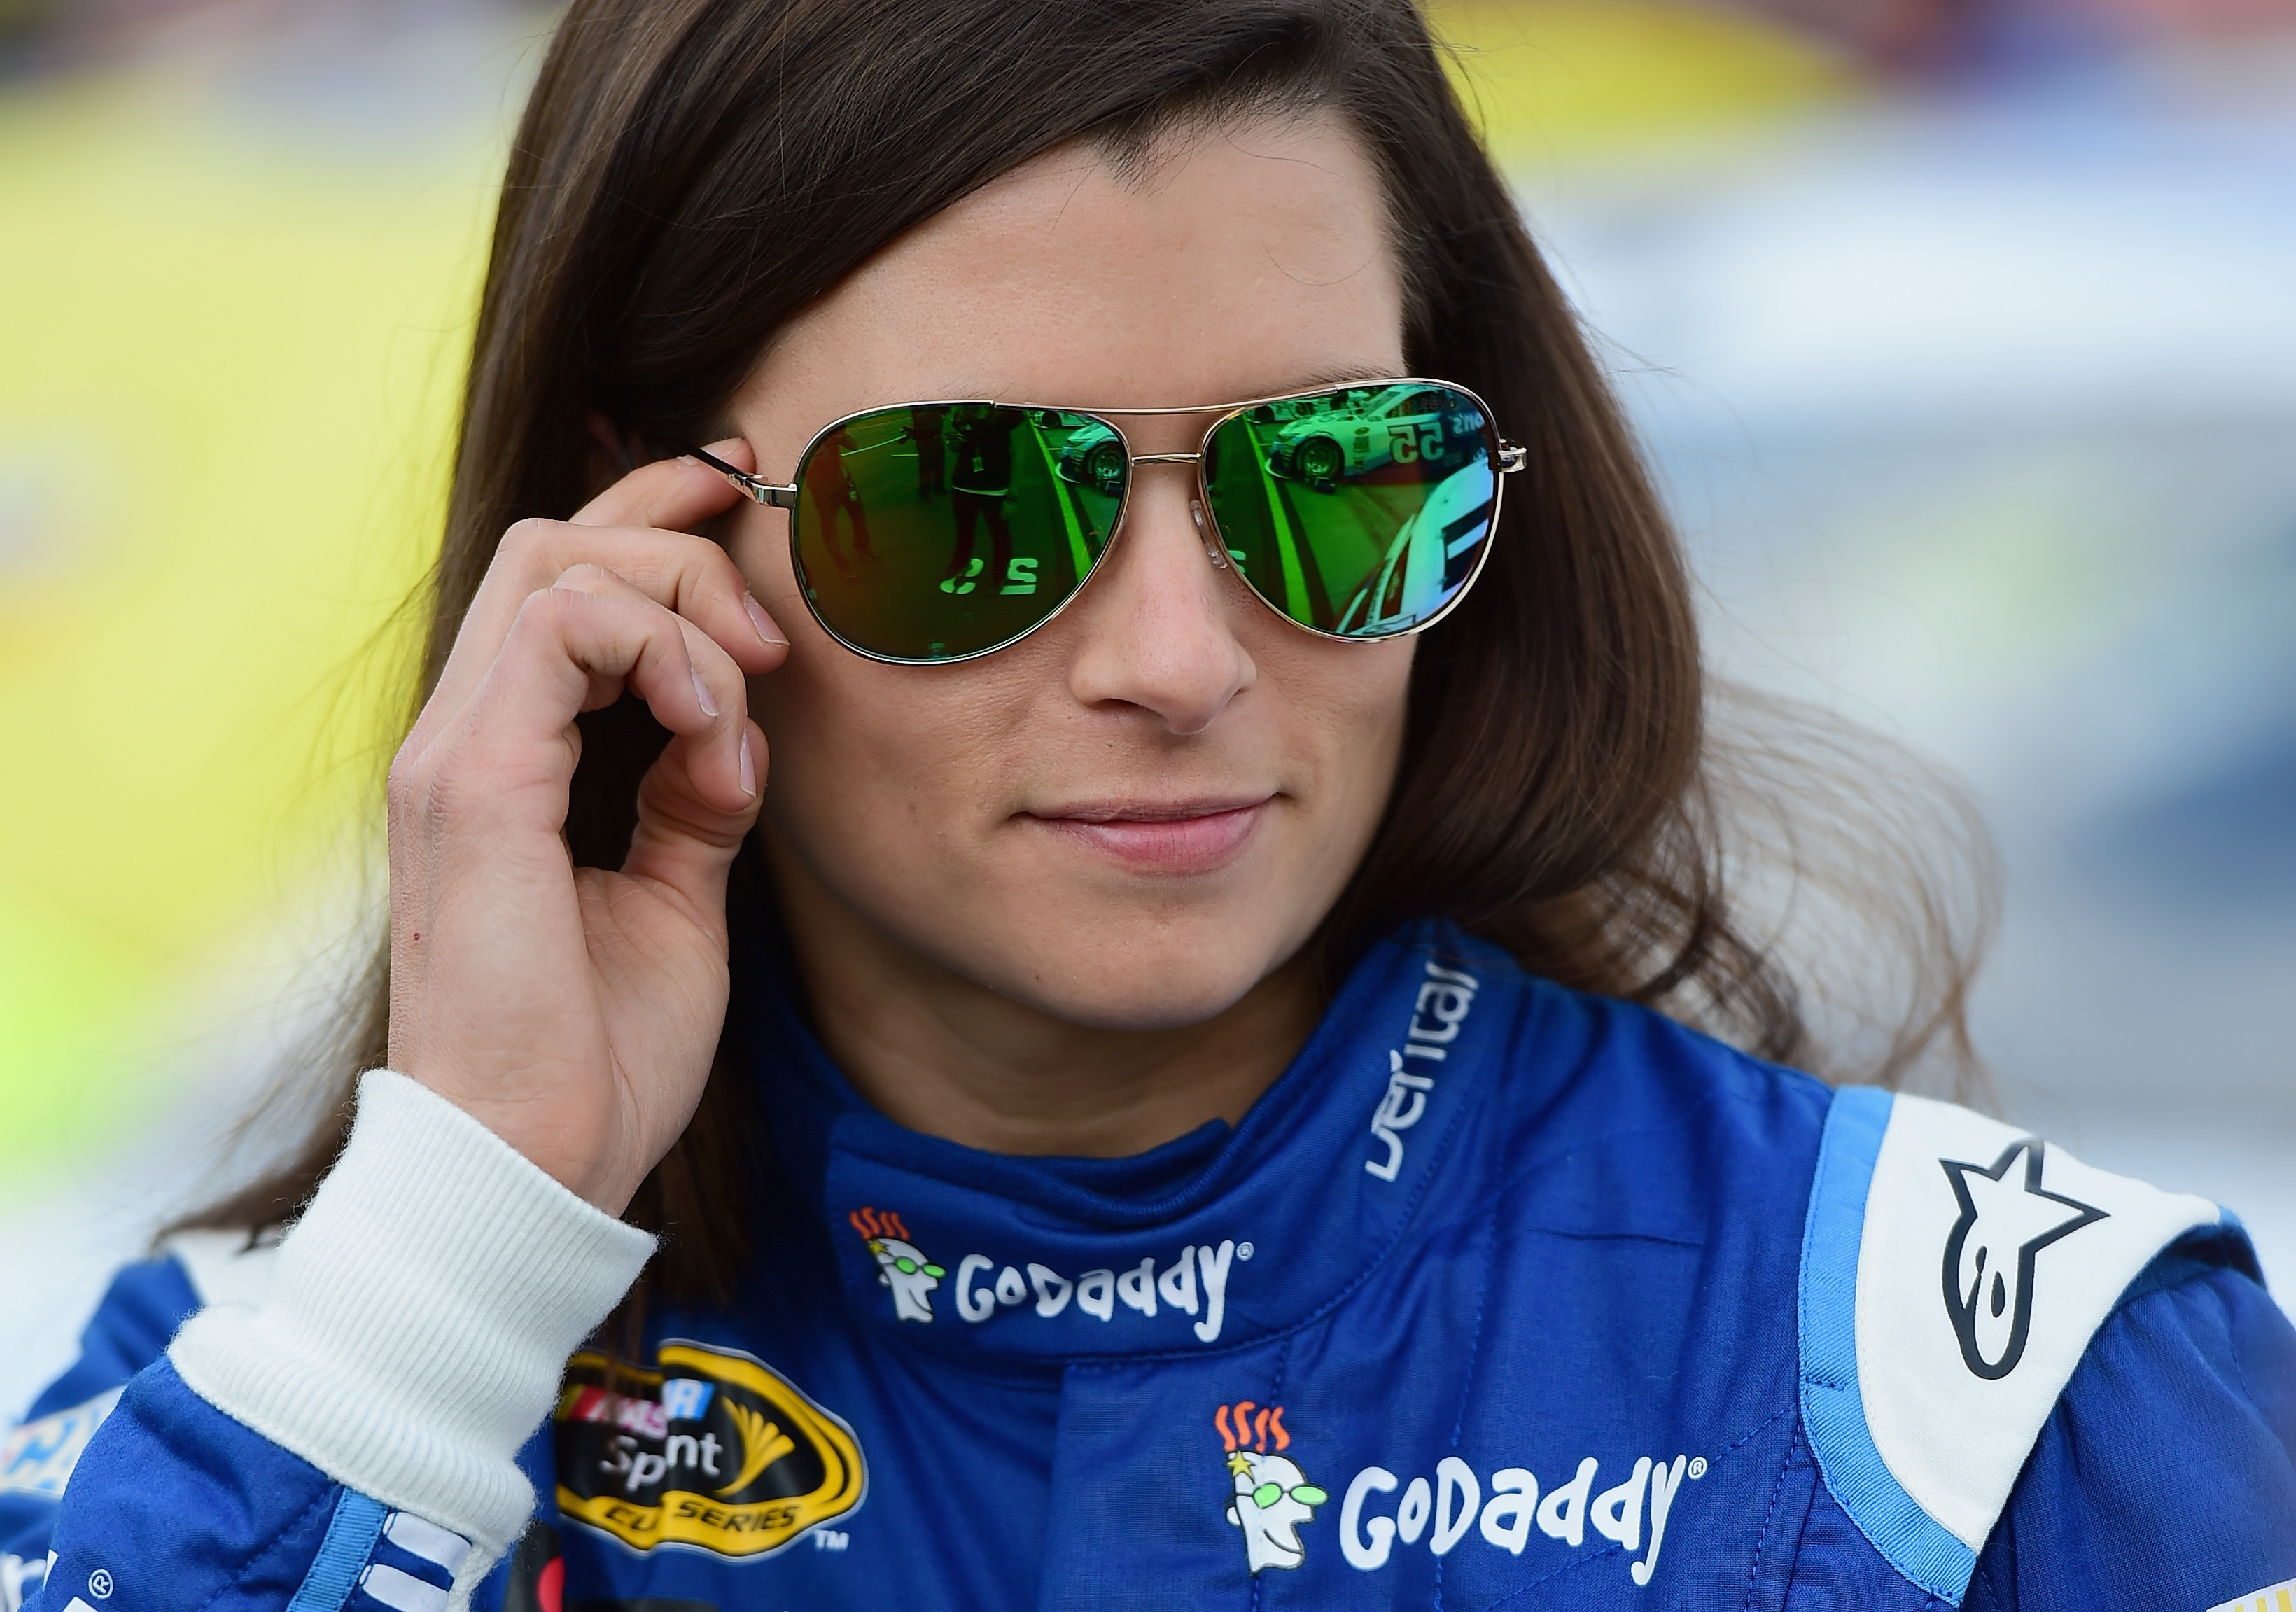 Danica Patrick Is as High on Her Cooking Abilities as She Is About Her Racing Skills